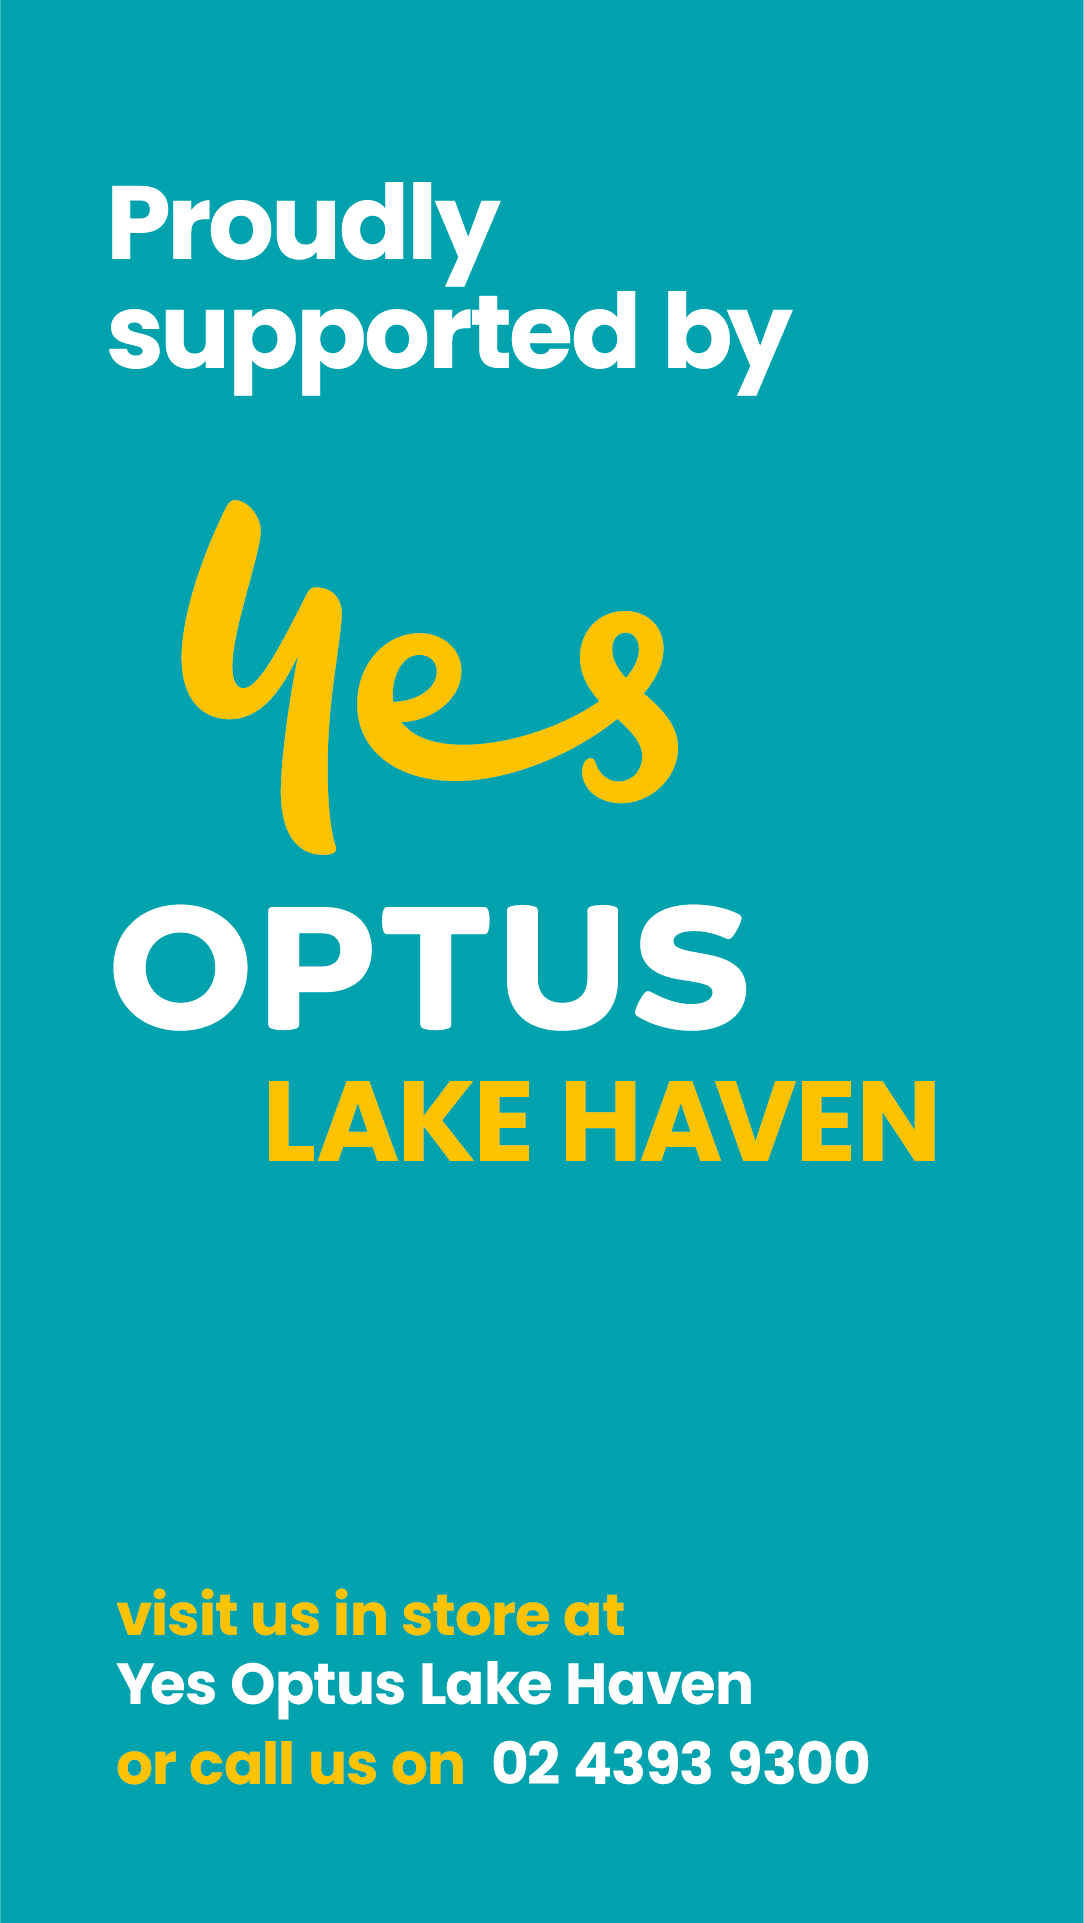 Optus 382x678 Proudly Supported by LakeHaven FA (1) (1)